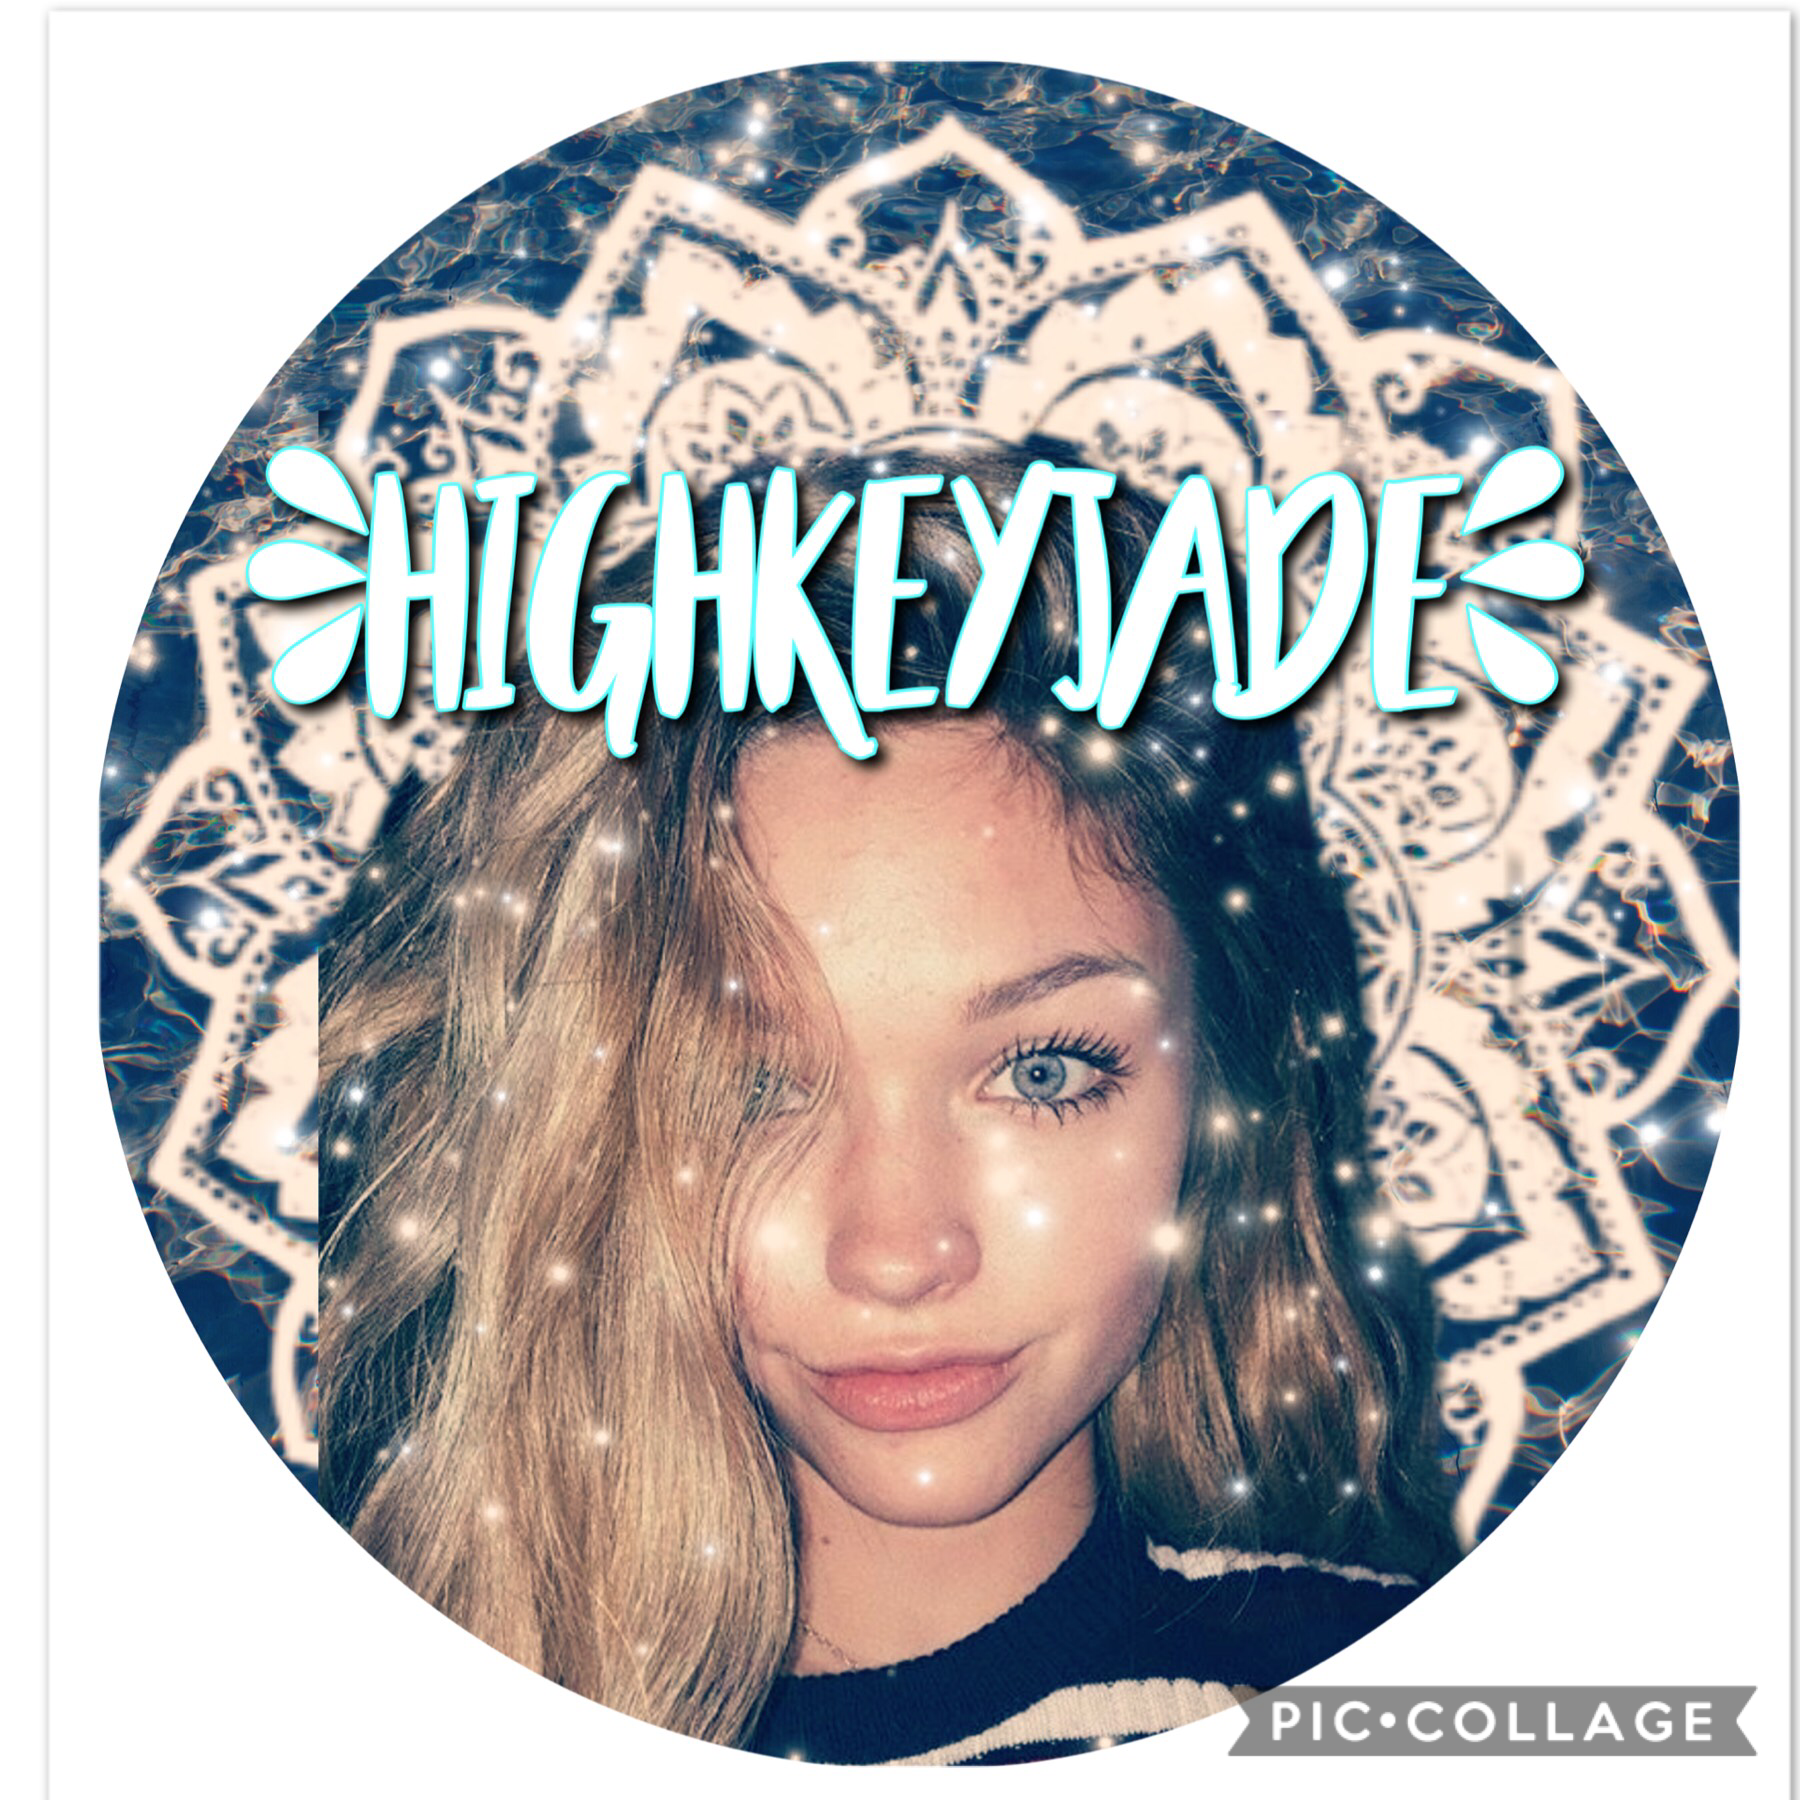 Here is you icon HighkeyJade I hope you like it and please give credit❤️❤️
   🌙mxxnlight tutorials 